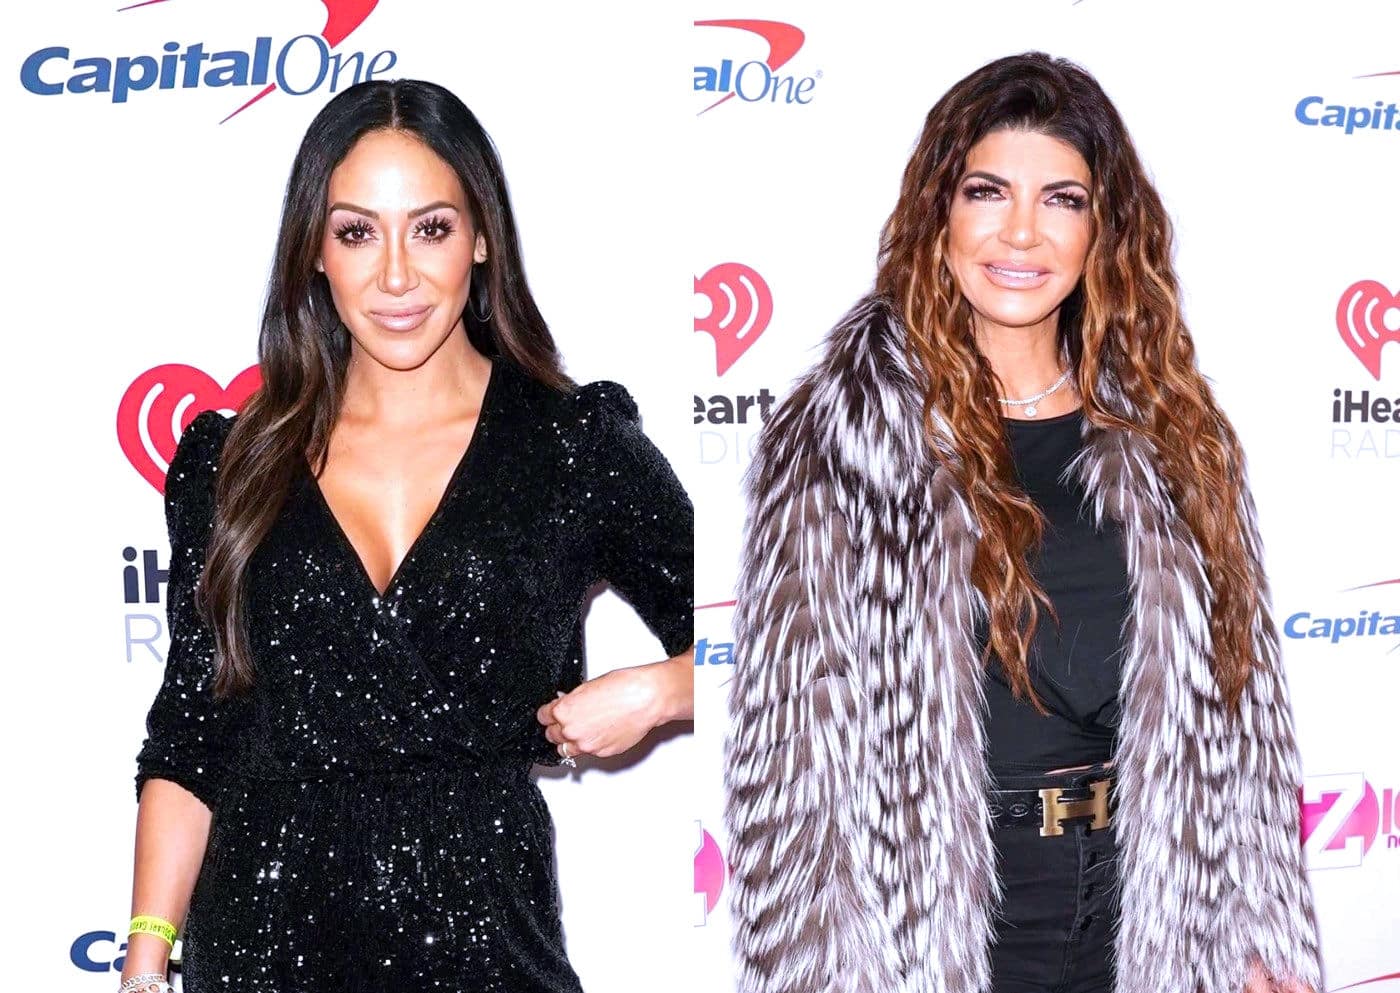 RHONJ's Melissa Gorga Gives Update on Relationship with Teresa Giudice, Teases Upcoming Season and Talks Friendships With Costars